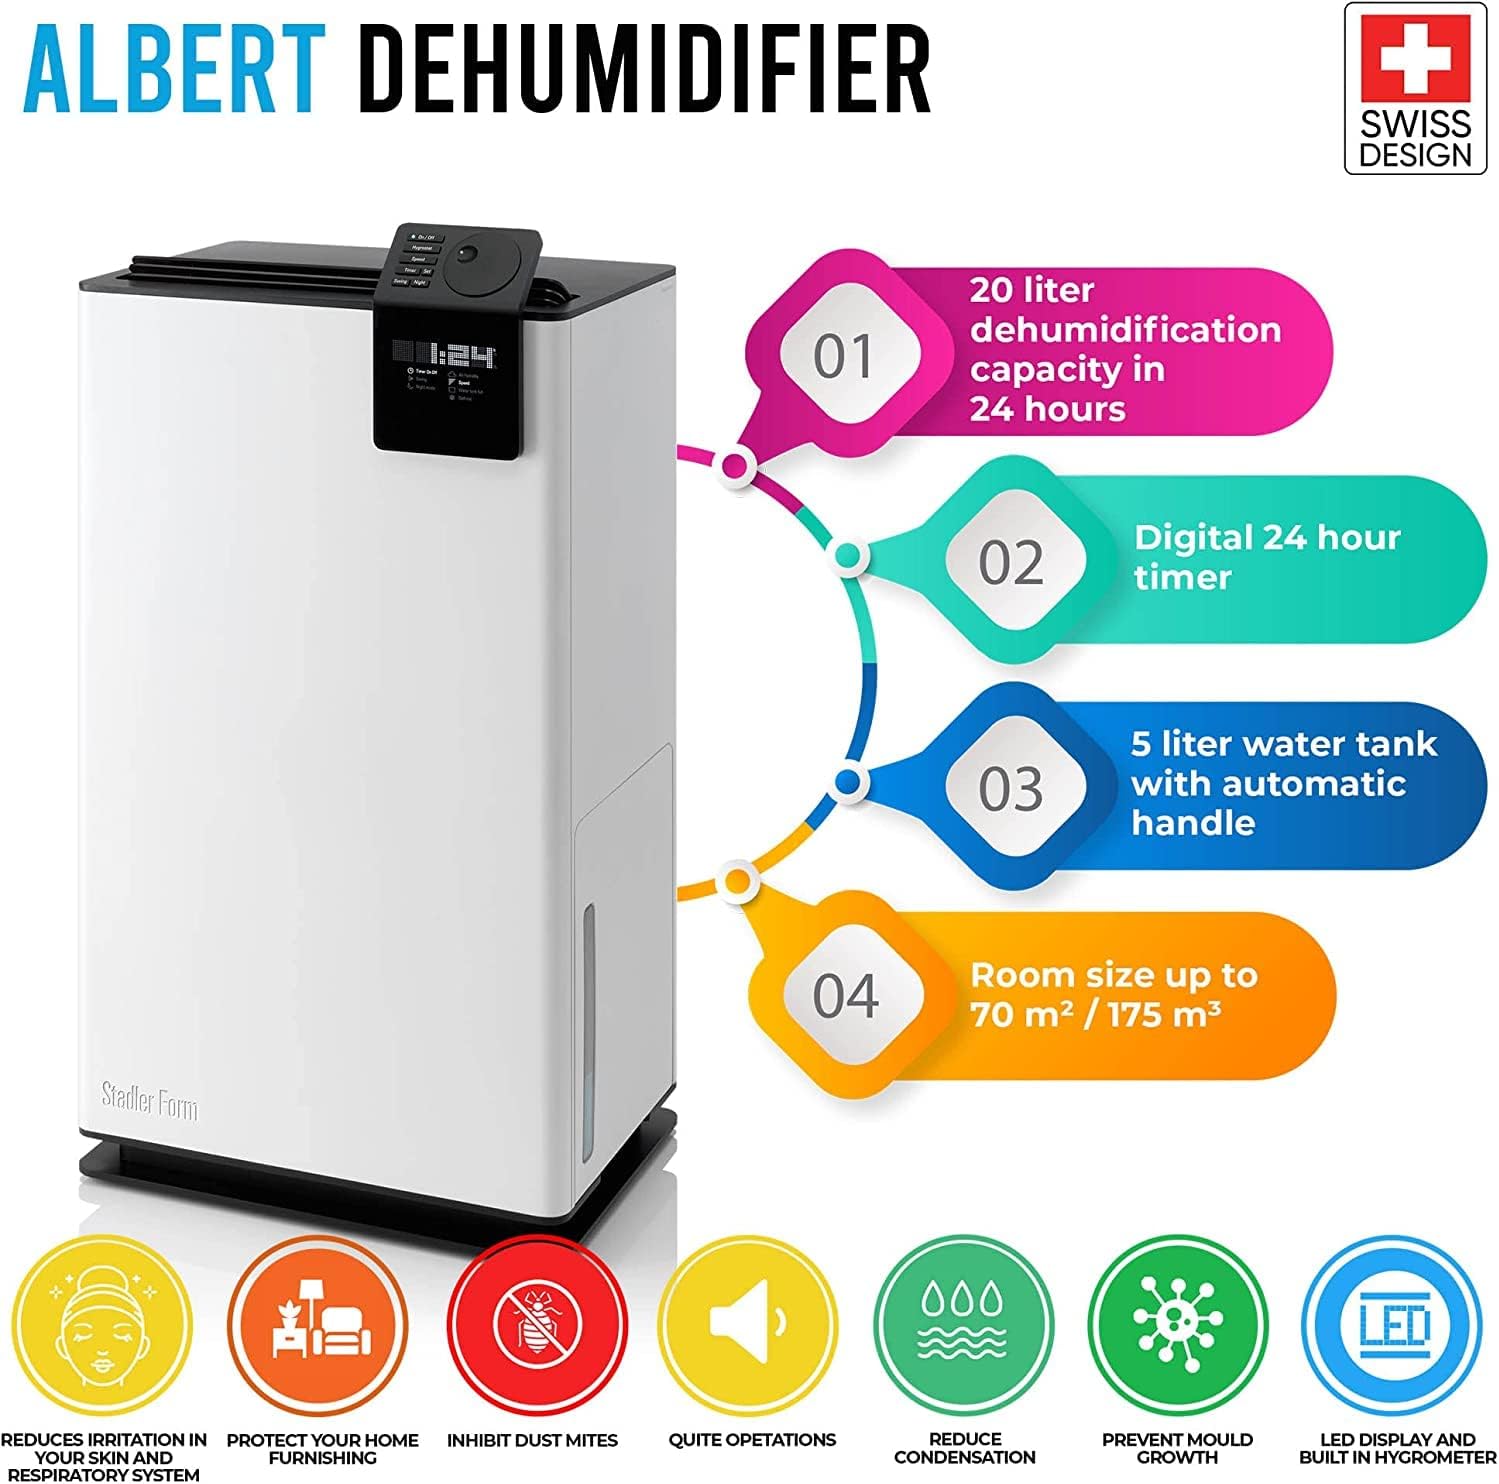 Swiss Design Dehumidifier-Mold Prevention for Home/Office up to 70sqm,Whisper-Quiet,Adaptive Night & Swing Modes,Continuous Drainage Albert ,2 Year Warranty+Local Support-GCC Power Plug